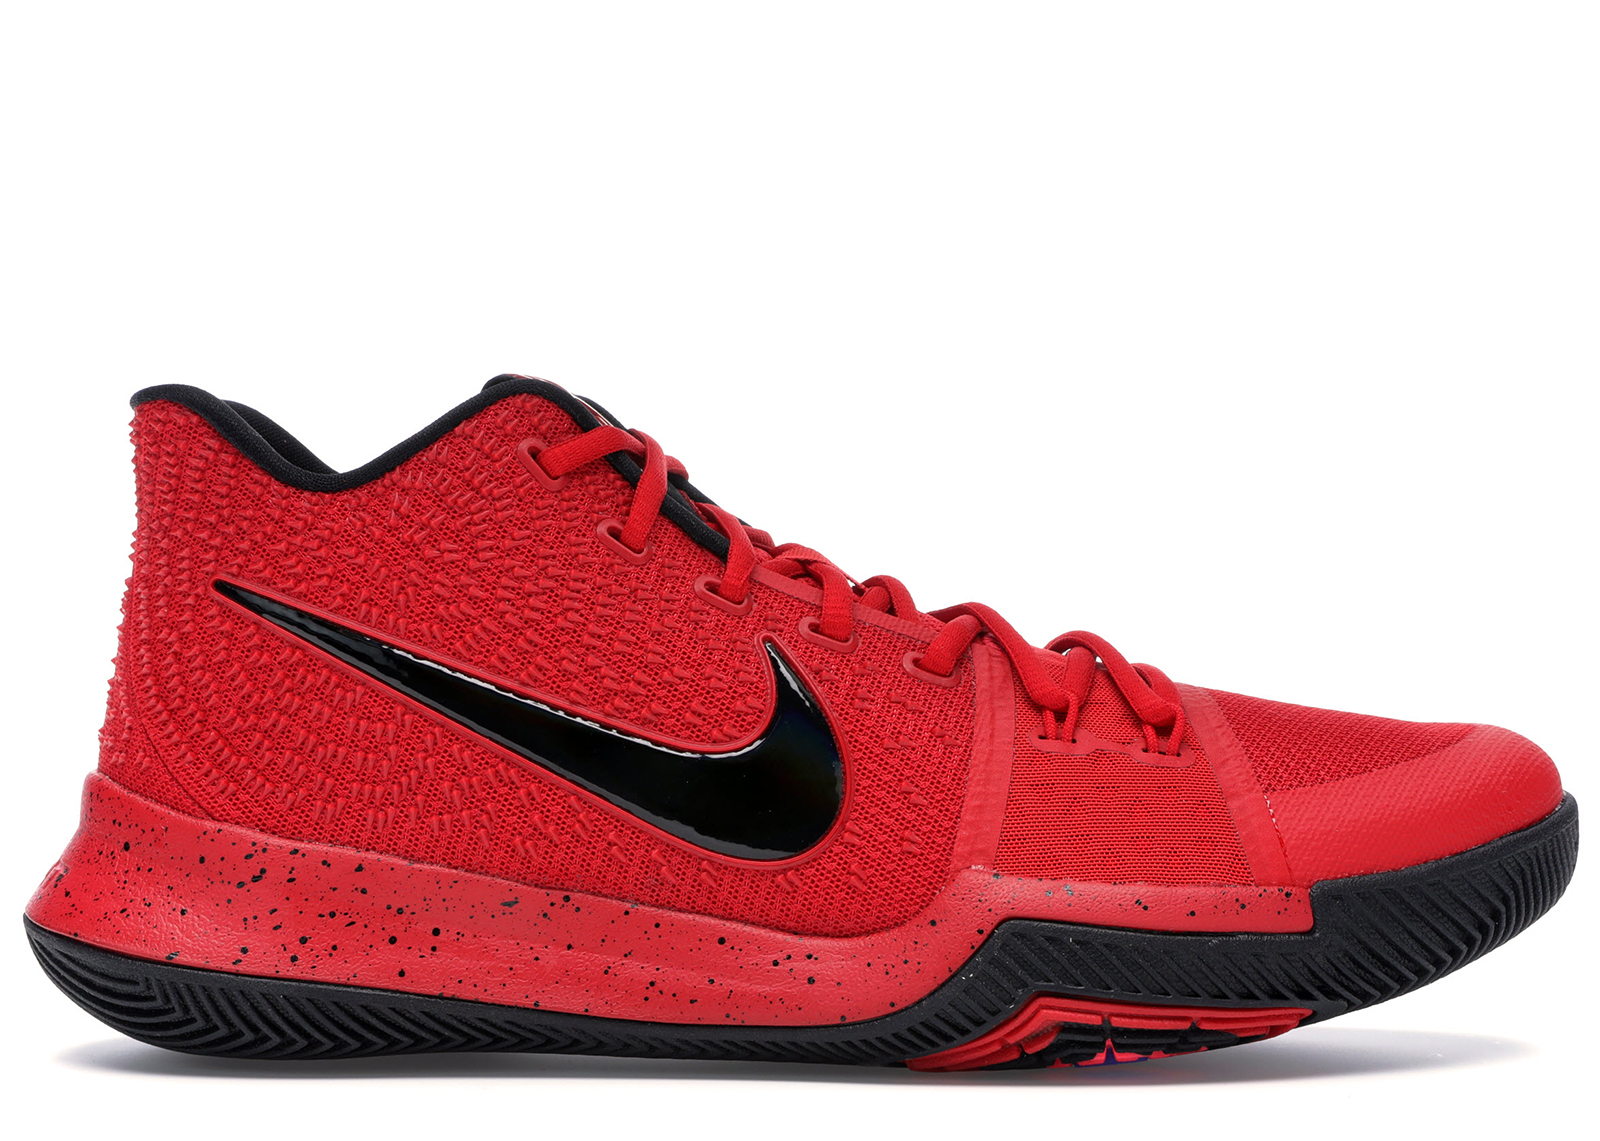 Nike Kyrie 3 Three Point Contest Candy Apple Men's - 852395-600 - US